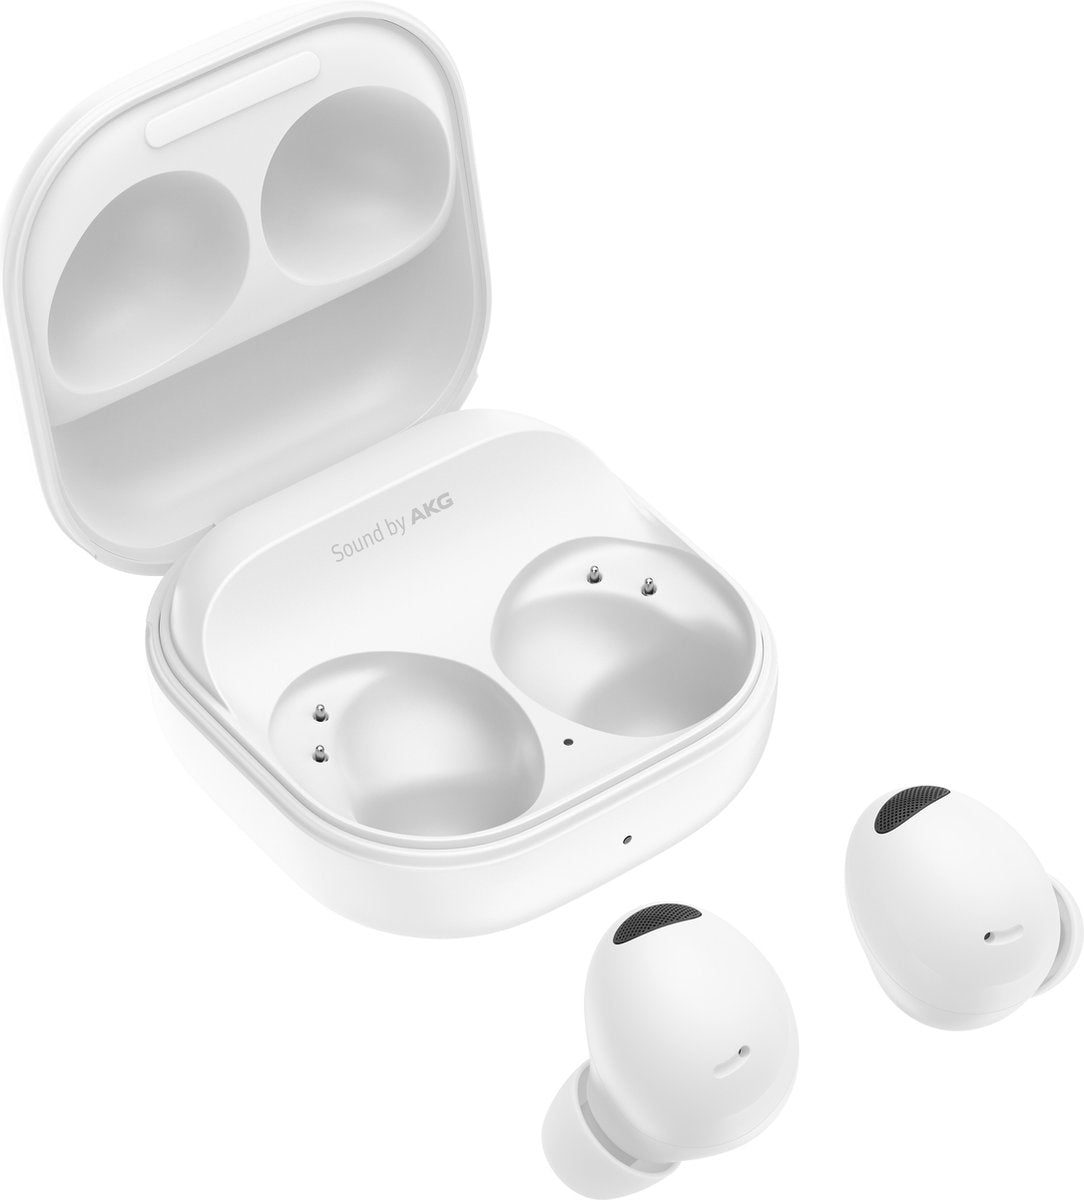 Samsung Galaxy Buds 2 Pro - Wireless earbuds with Noise Canceling - White